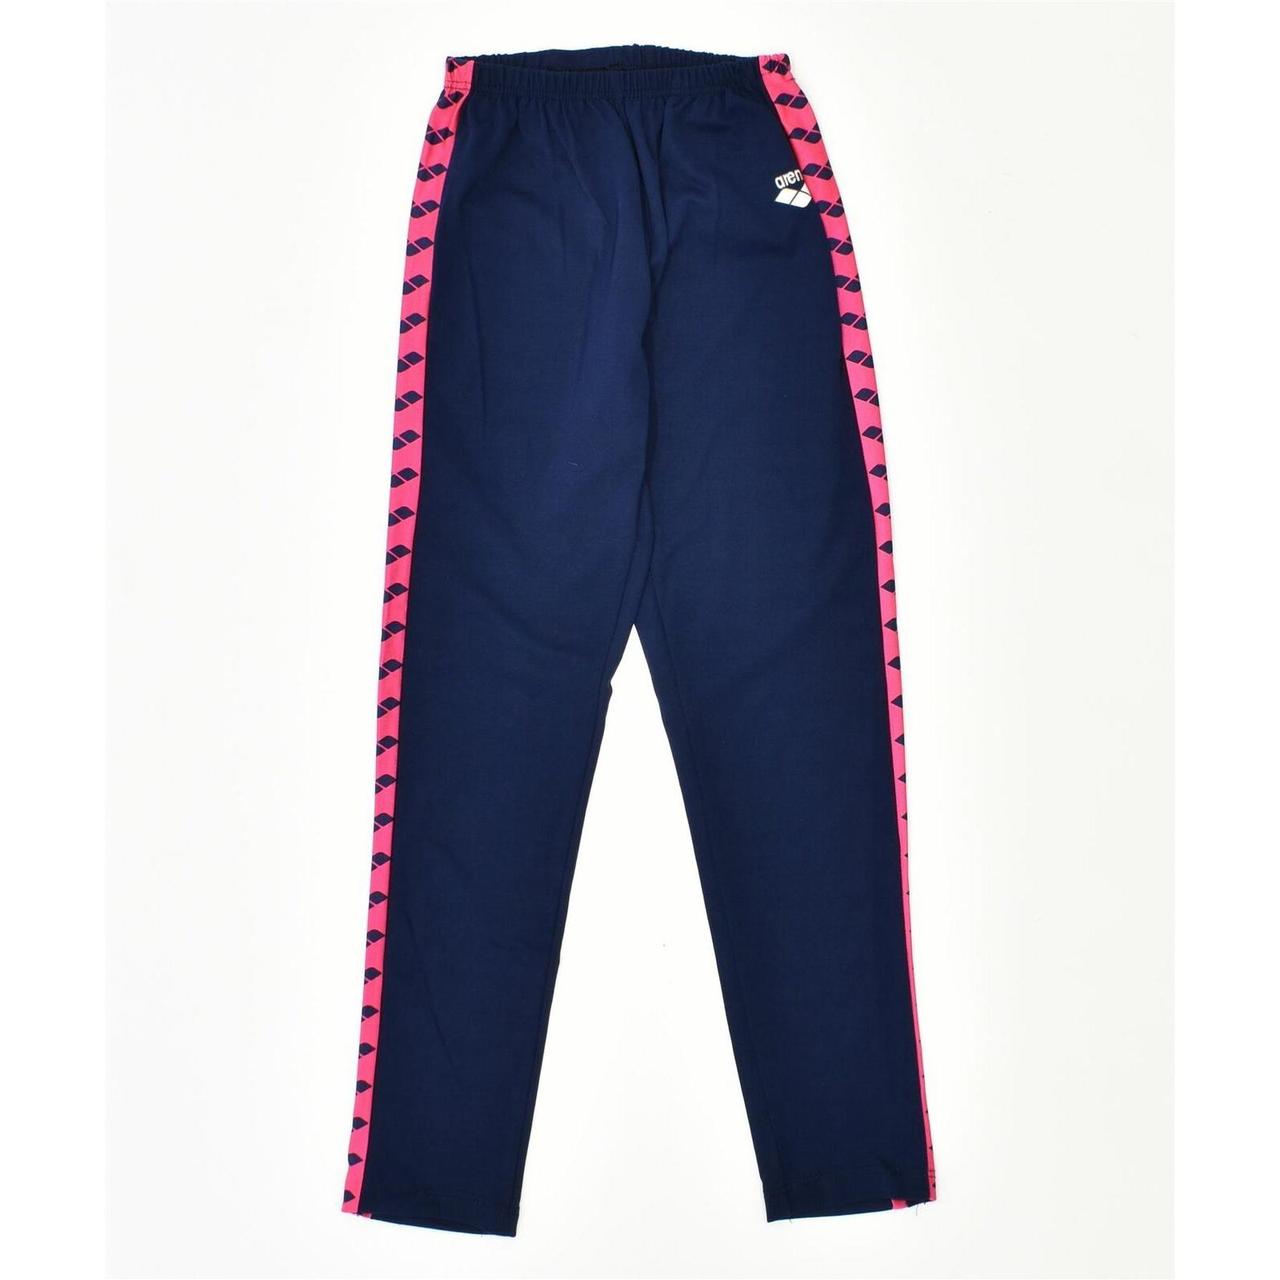 Product Image 1 - ARENA Womens Tracksuit Trousers UK